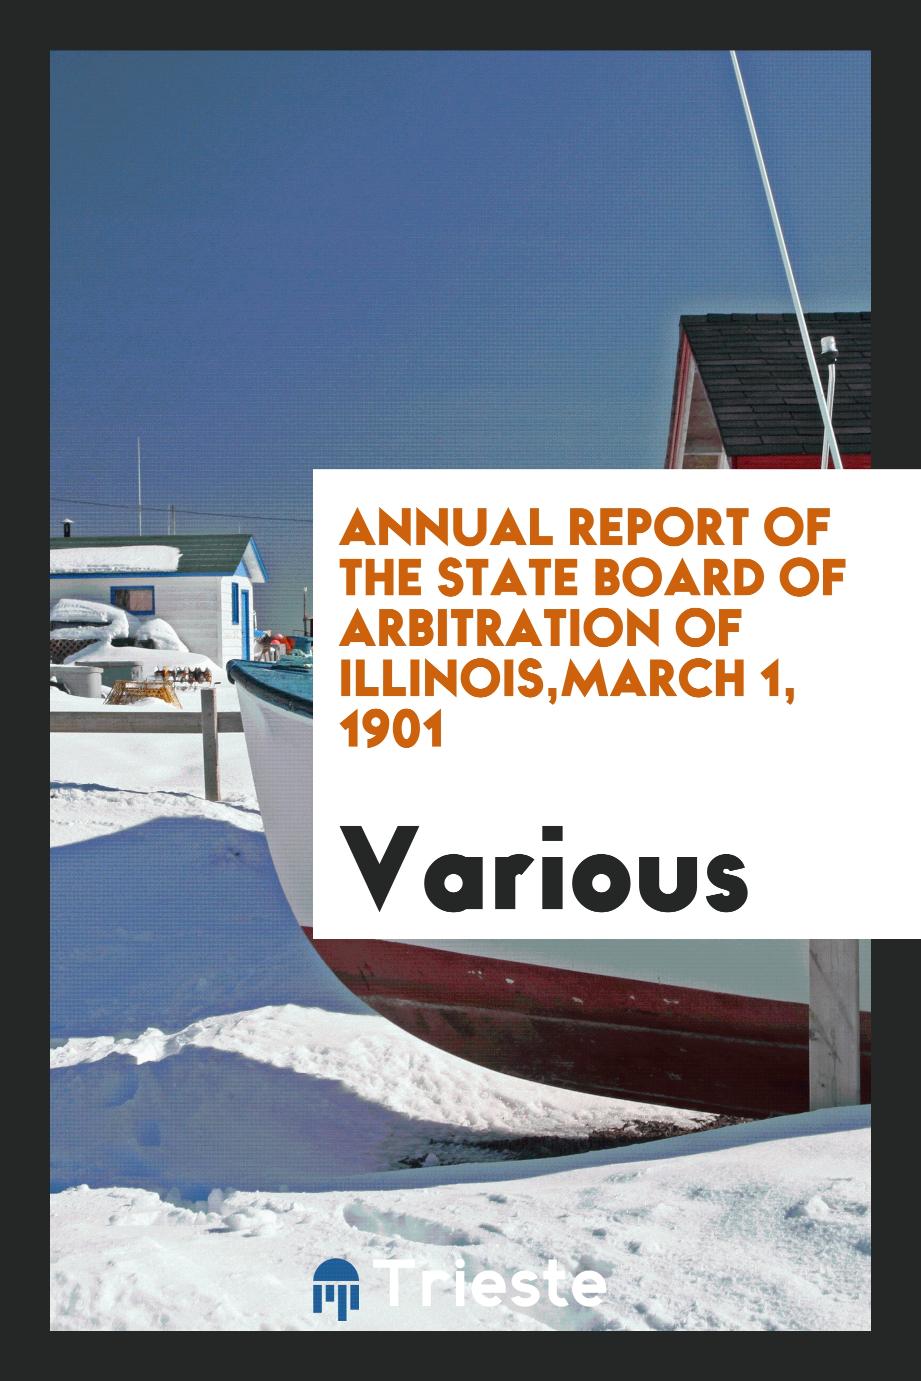 Annual report of the State Board of Arbitration of Illinois,March 1, 1901